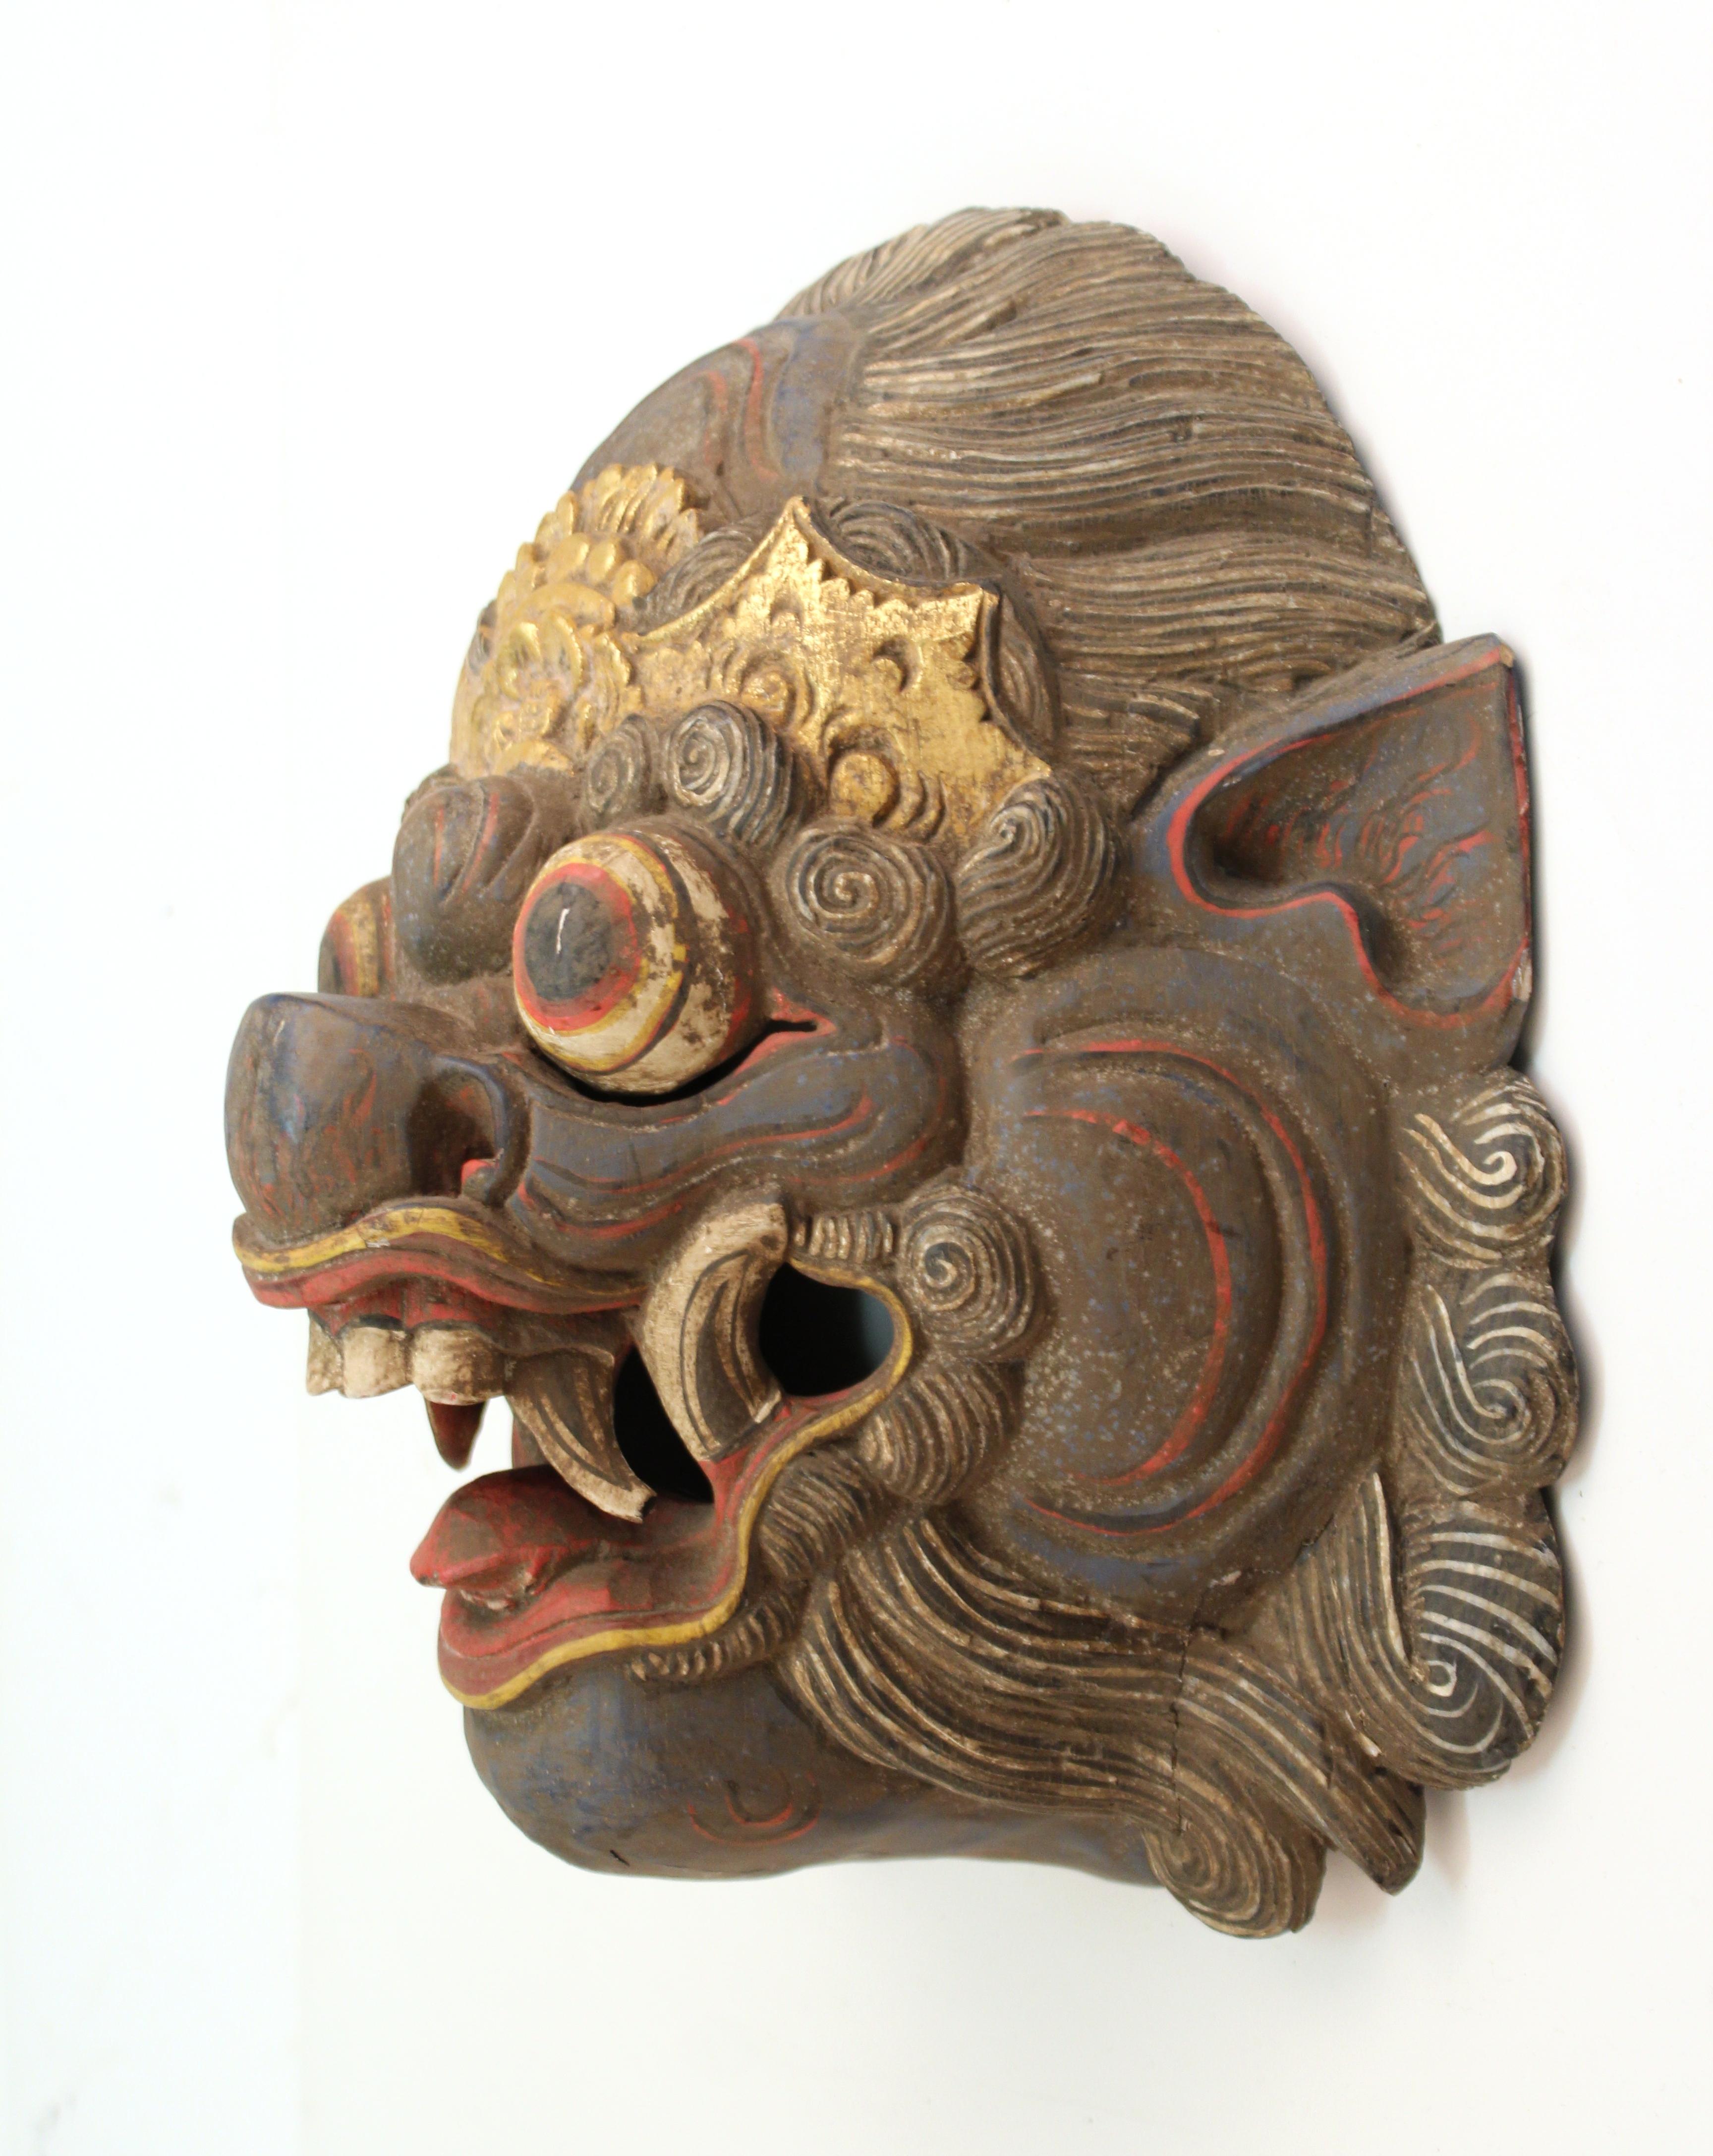 Balinese Barong hand carved and hand painted wood dance mask of an ornate colorful mythological creature. The piece is in good vintage condition and was produced during the 20th century. Some age-appropriate wear.